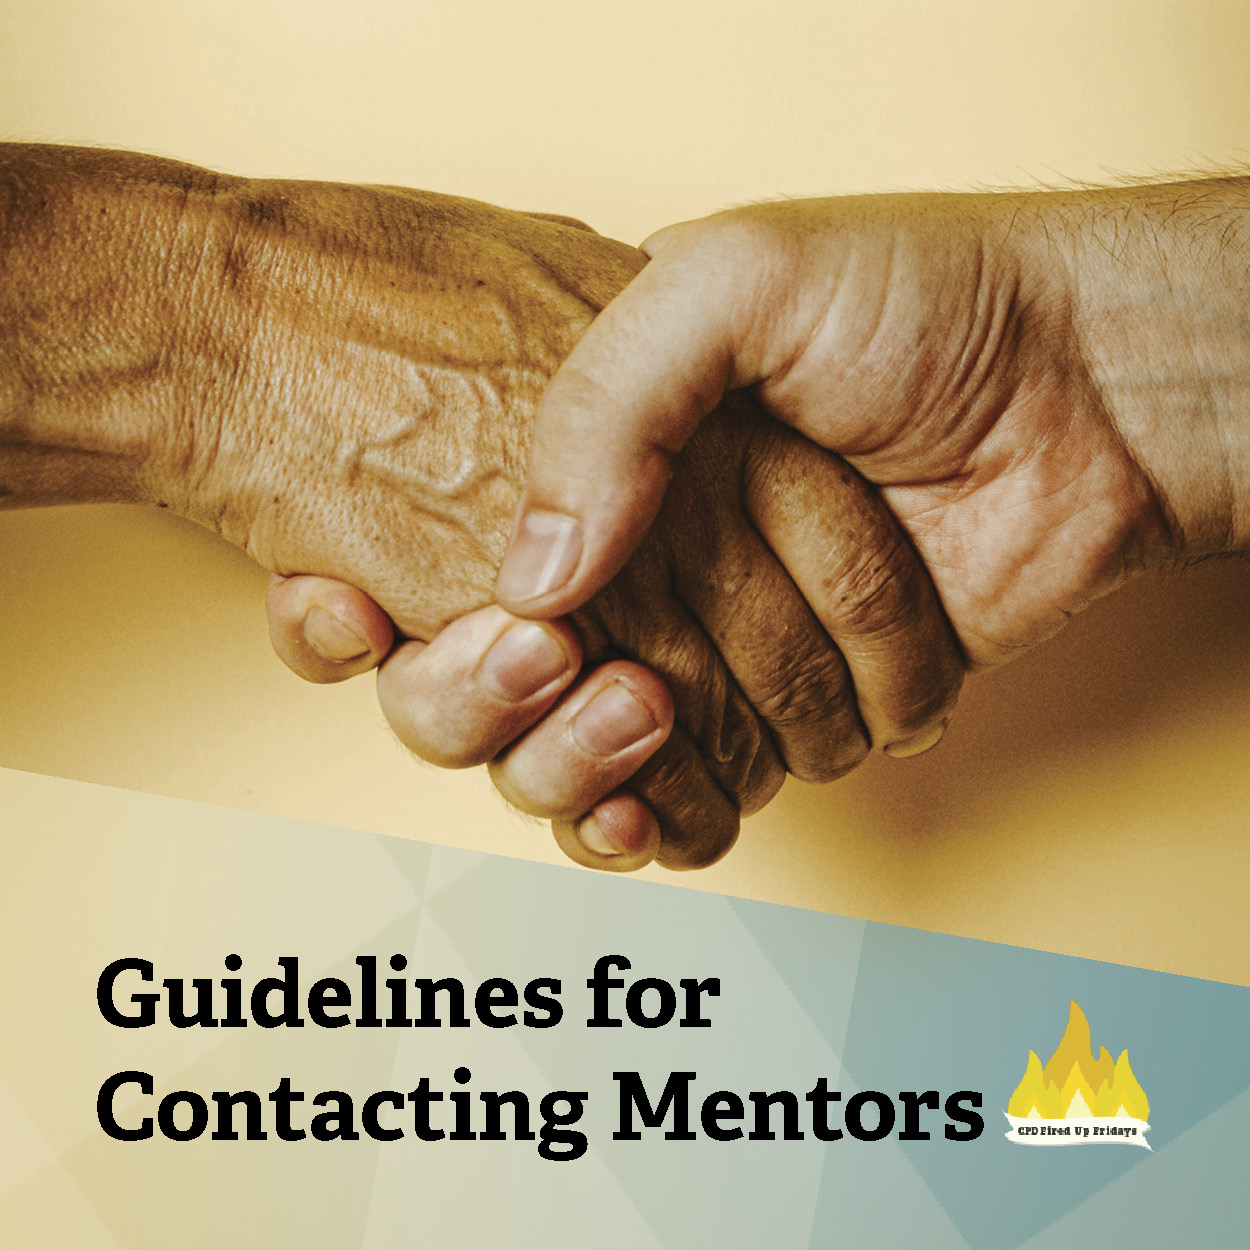 Two hands are clasped in a handshake. Underneath, text reads: 'Guidelines for Contacting Mentors.'